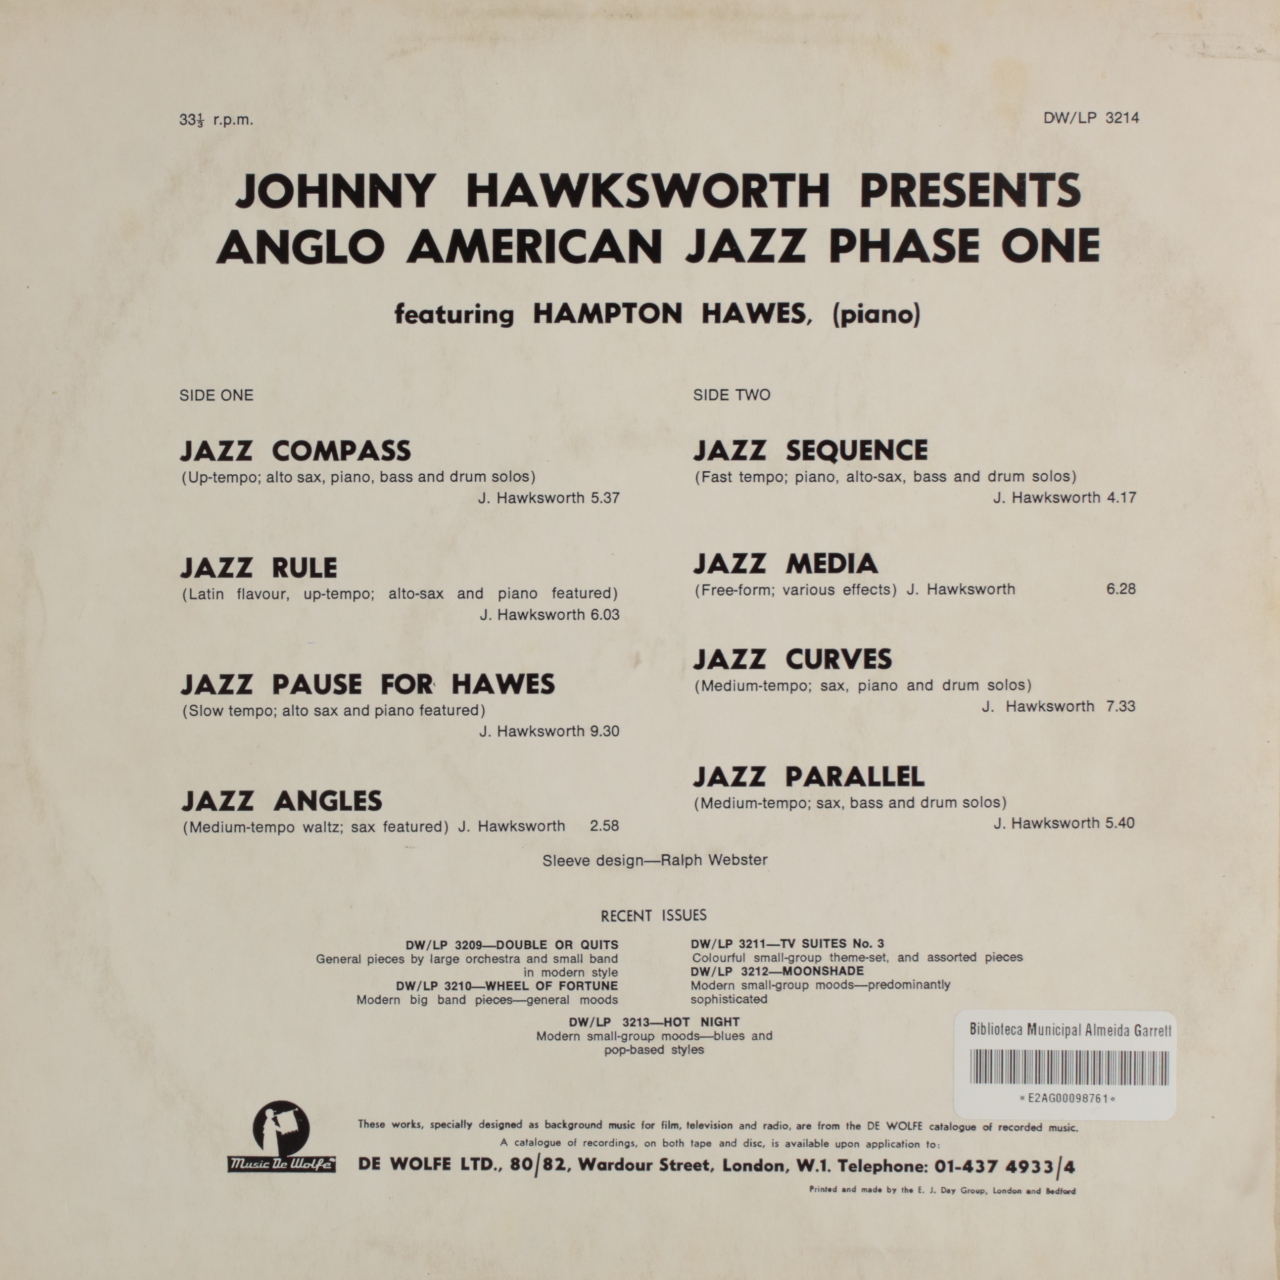 Anglo American Jazz: Phase 1